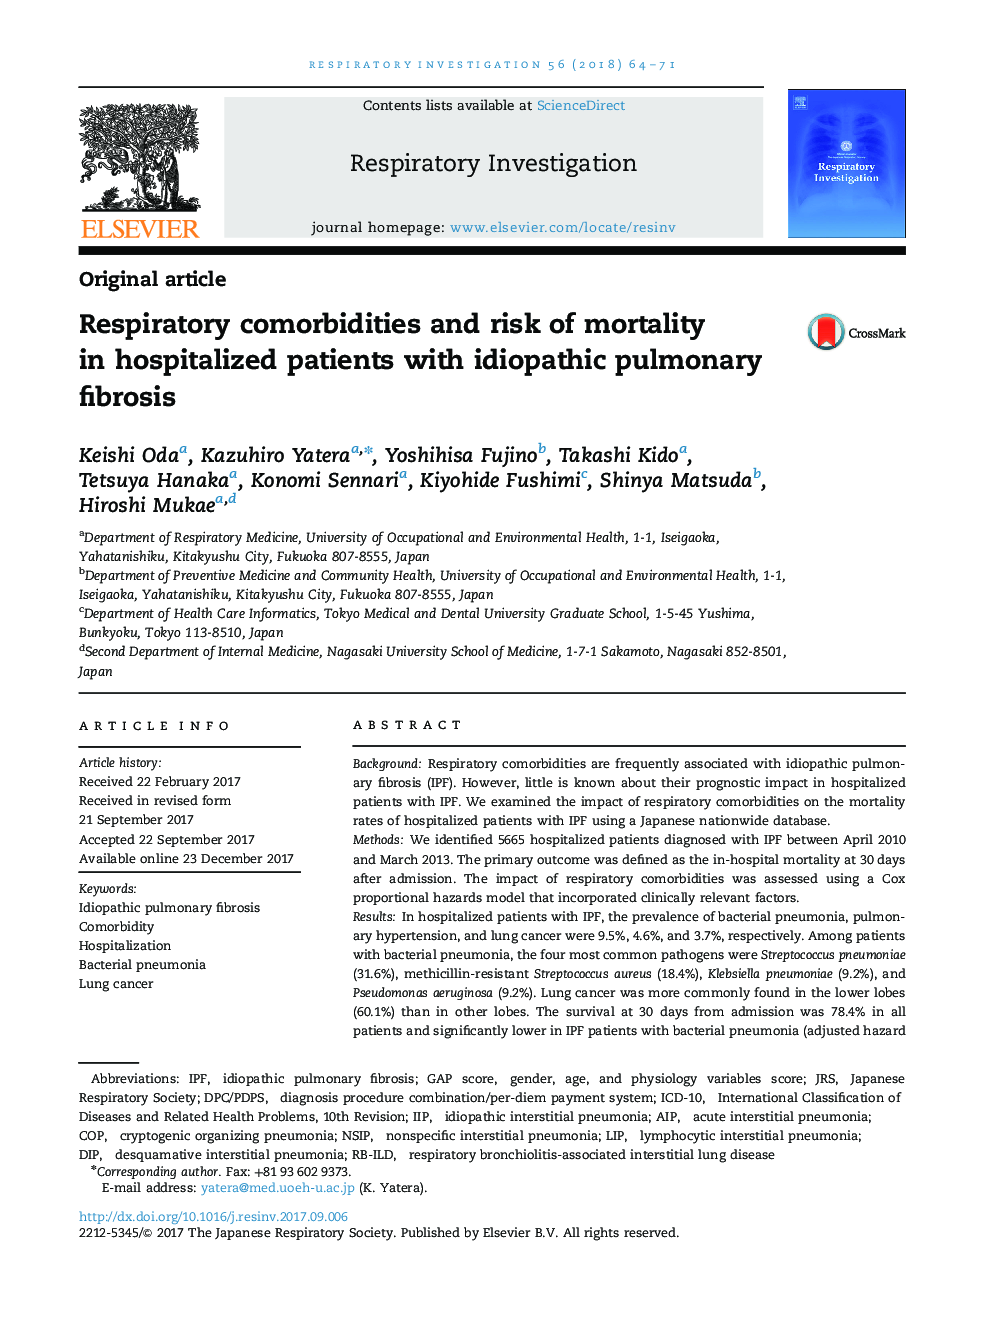 Respiratory comorbidities and risk of mortality in hospitalized patients with idiopathic pulmonary fibrosis